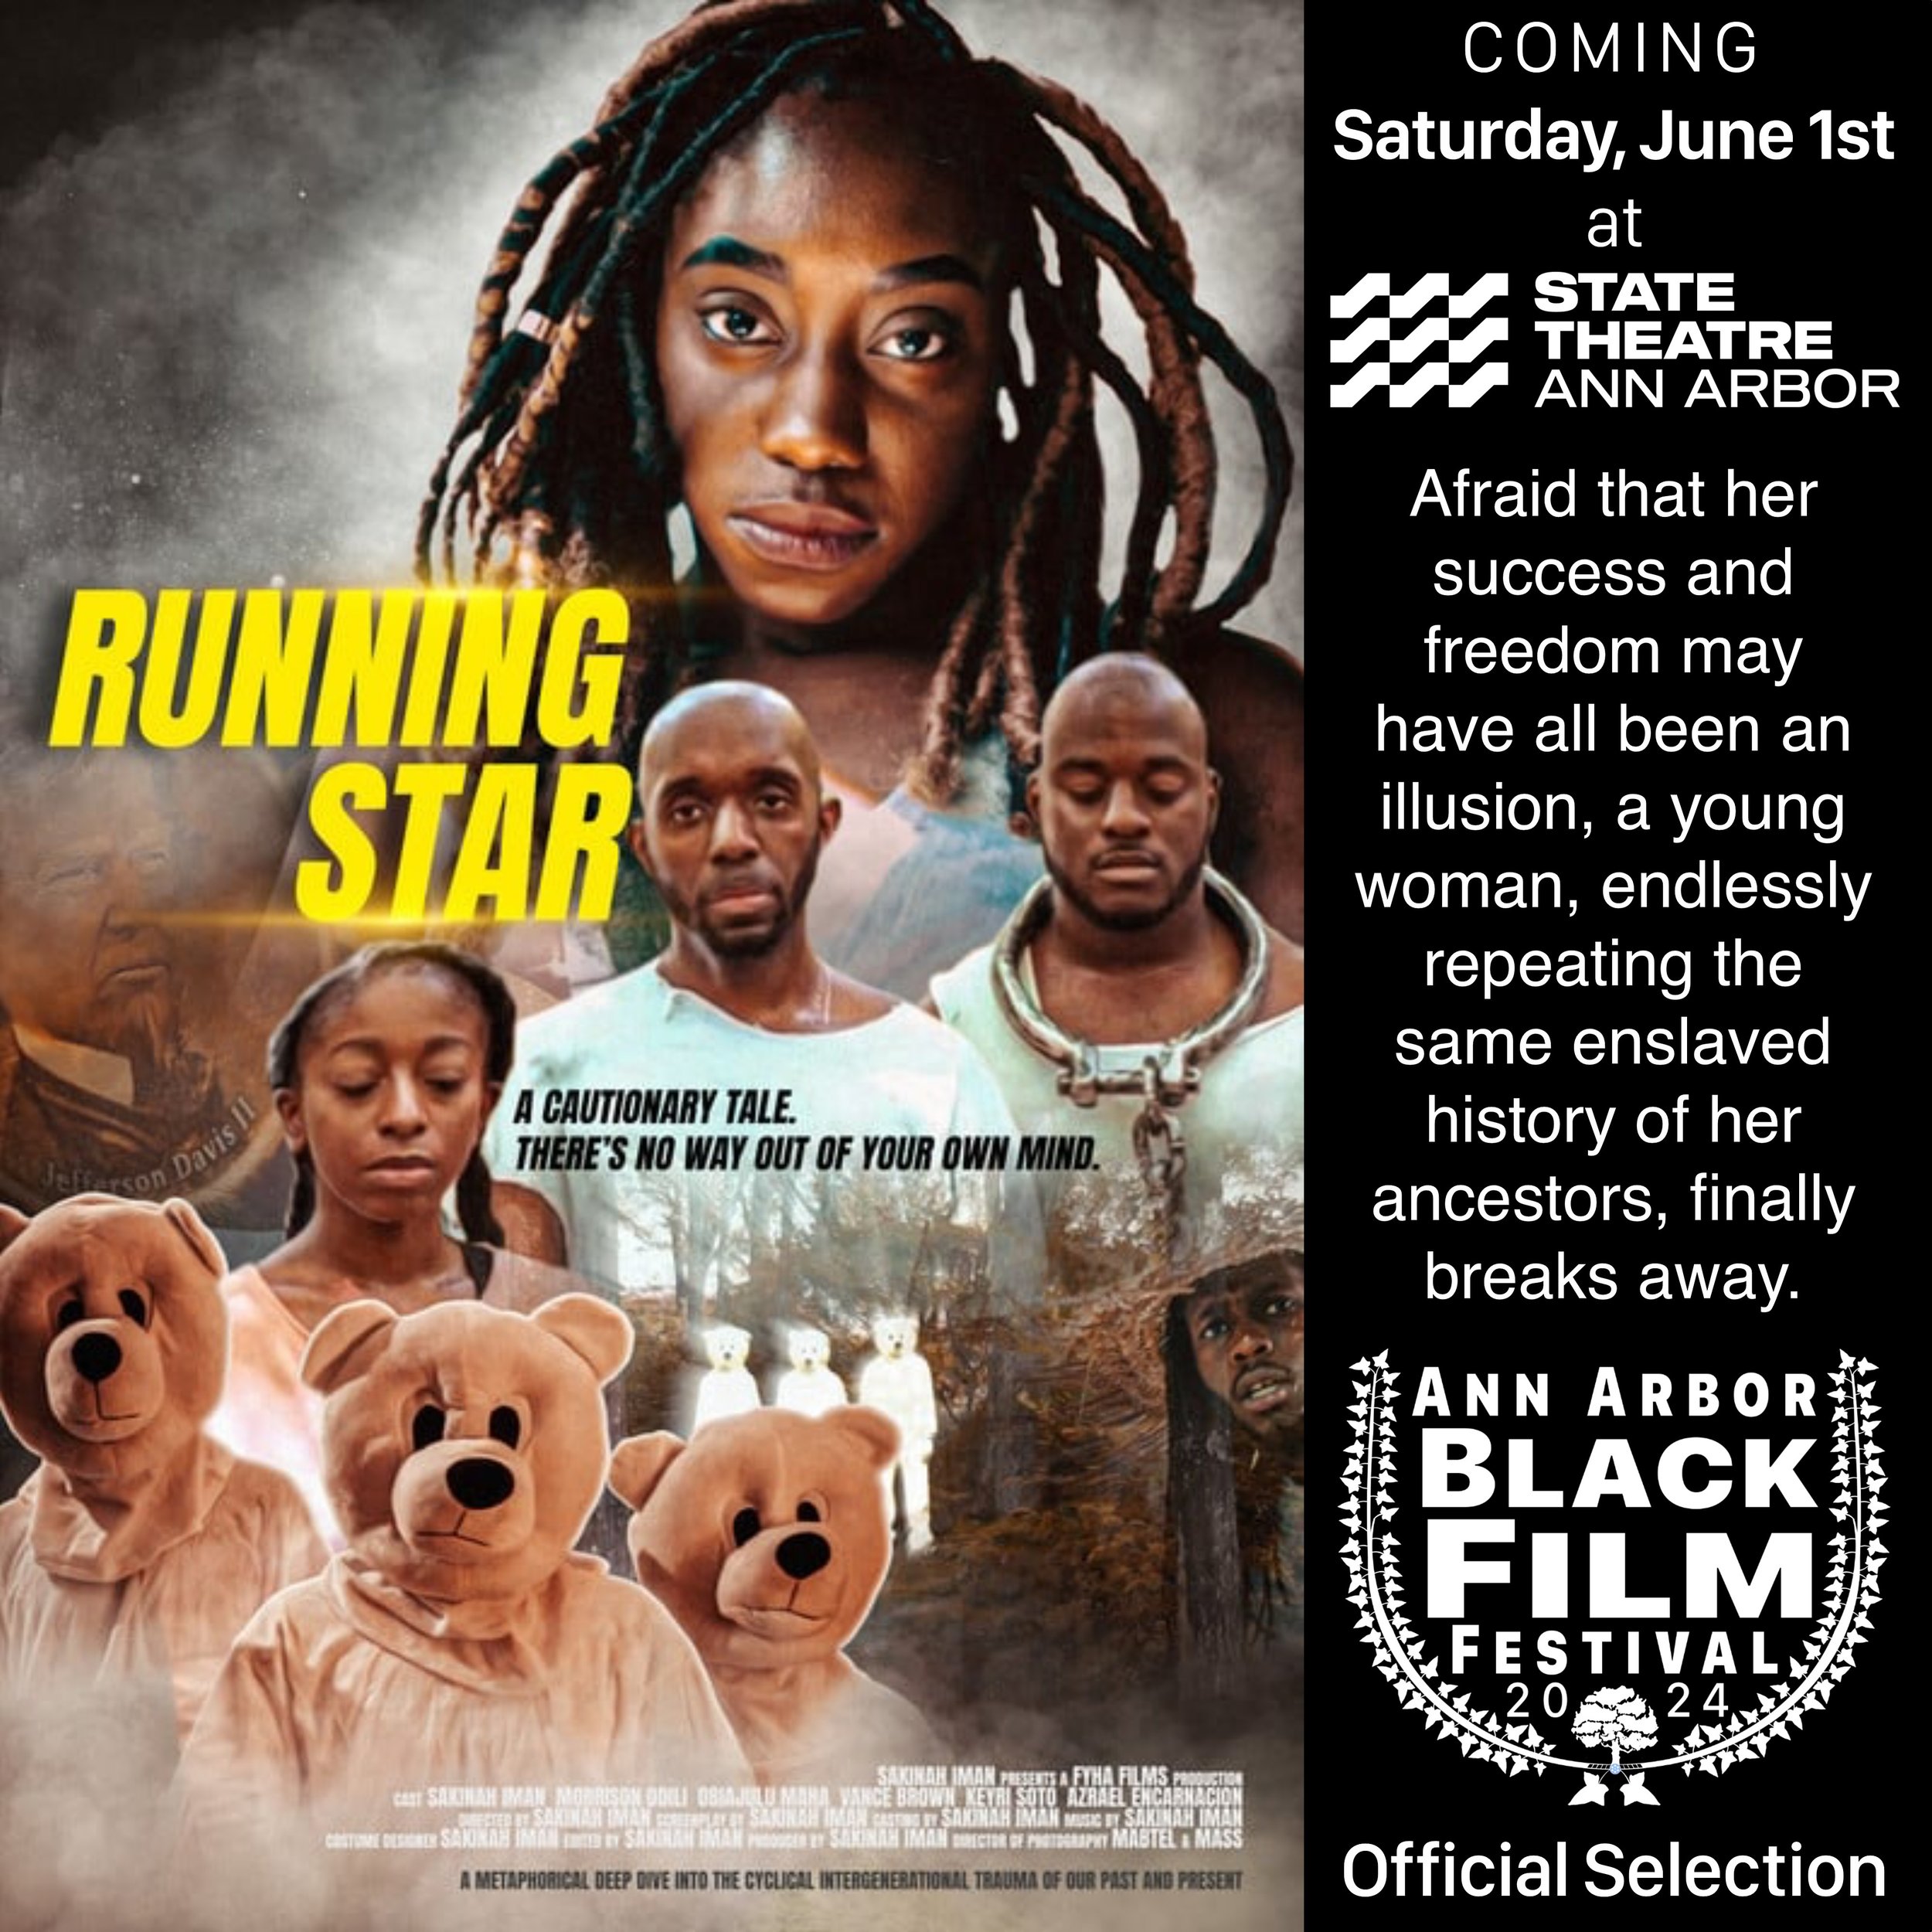 🎬✨ Get ready for the Ann Arbor the Black Film Festival! Join us on Saturday, June 1st at the State Theater for an journey in black cinema. 🎥🍿
🌟 Featuring: Running Star
🎬 Directed by the award-winning Sakinah Iman
🔗 More info: sakinahiman.com/fi